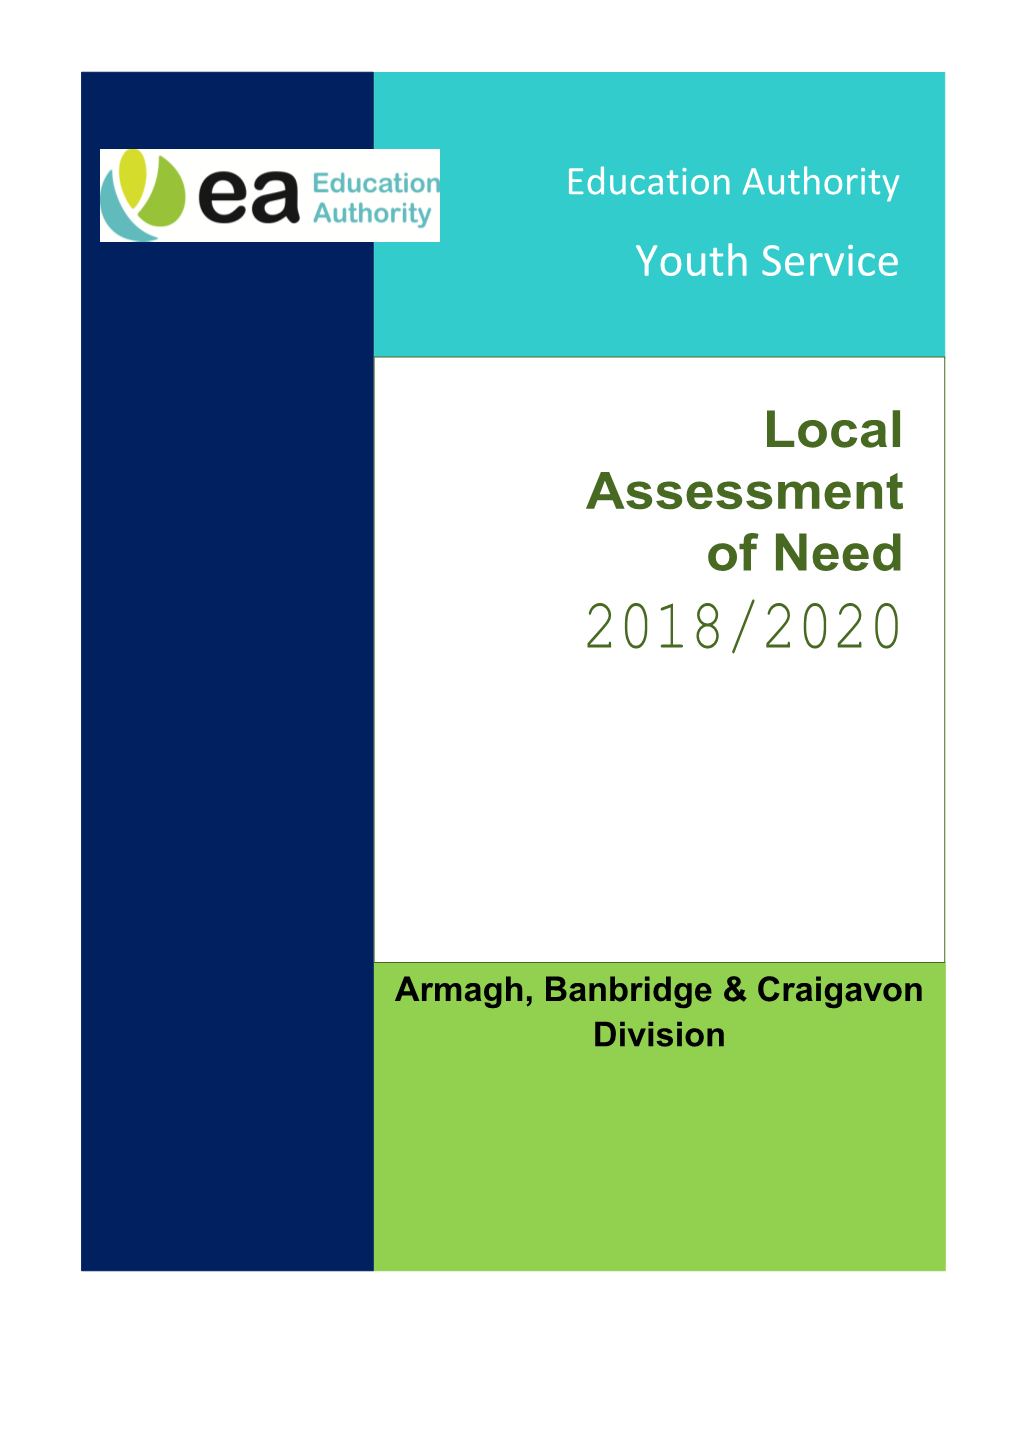 Armagh Banbridge & Craigavon Local Assessment of Need 2018-2020